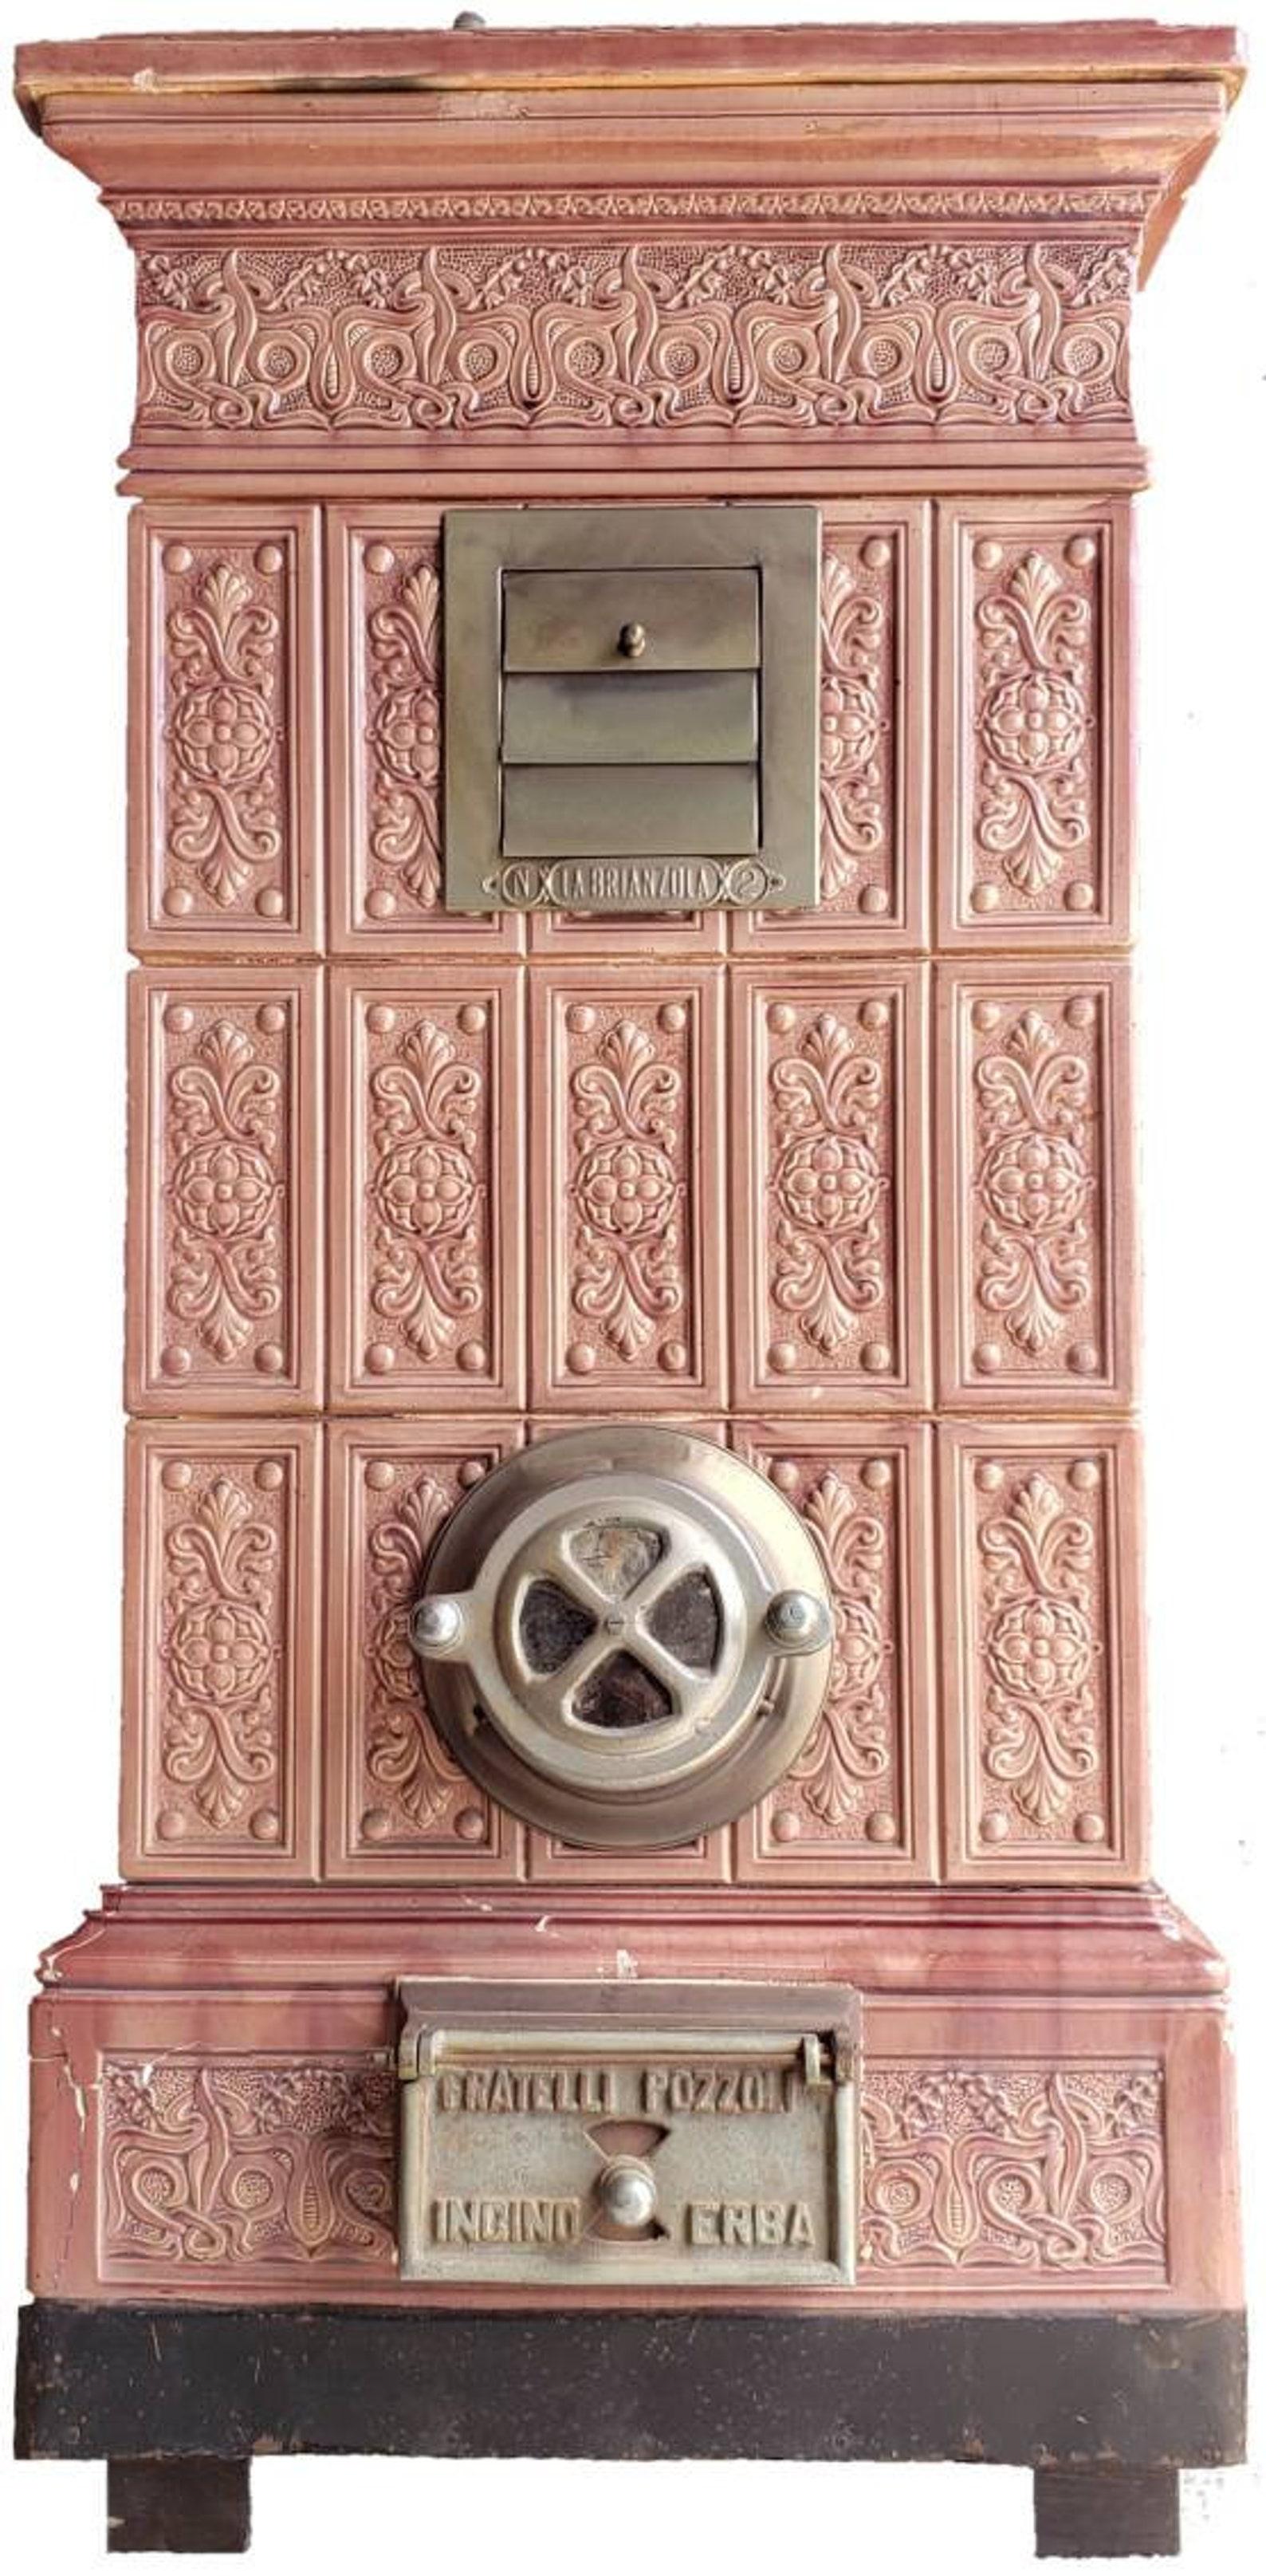 A rare and magnificent antique maiolica tiled heating stove from the late 19th century, monumental size, French Art Nouveau styling, Italian Alps origin, multi-fuel, finished in an attractive mauve finish with steel vents and door.

Handmade, signed